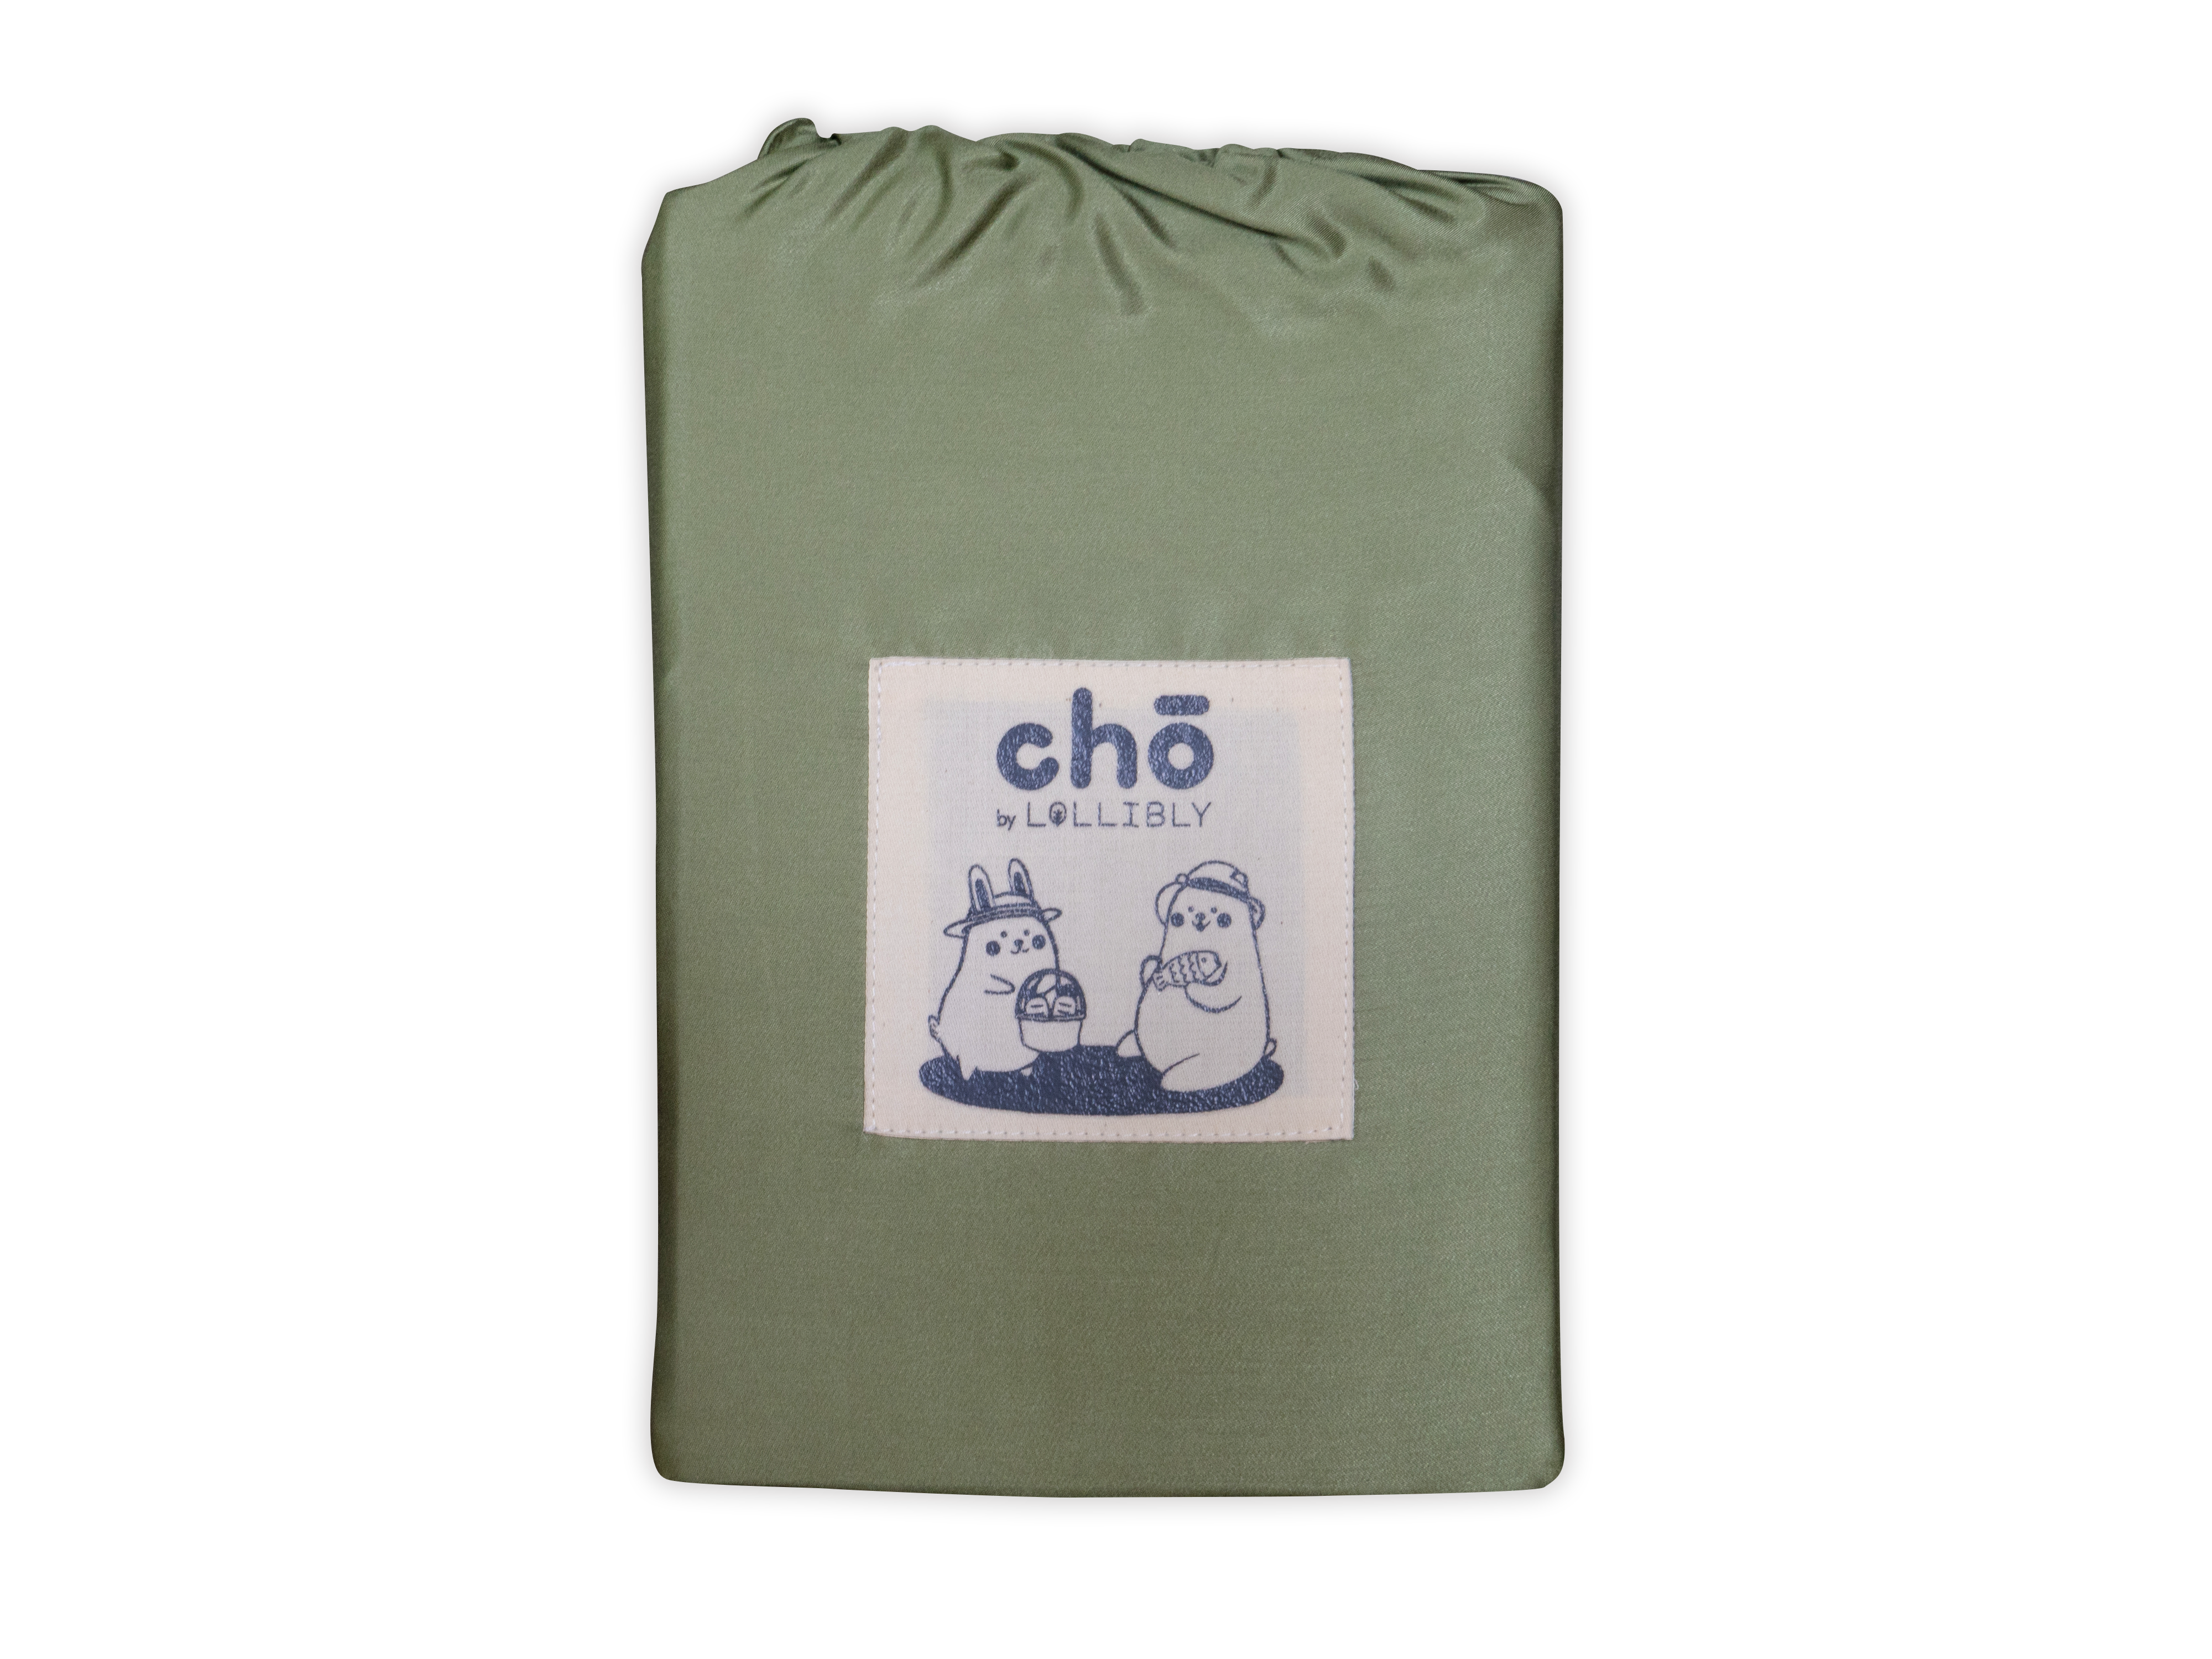 Olive cho crib and cot sheet in packaging